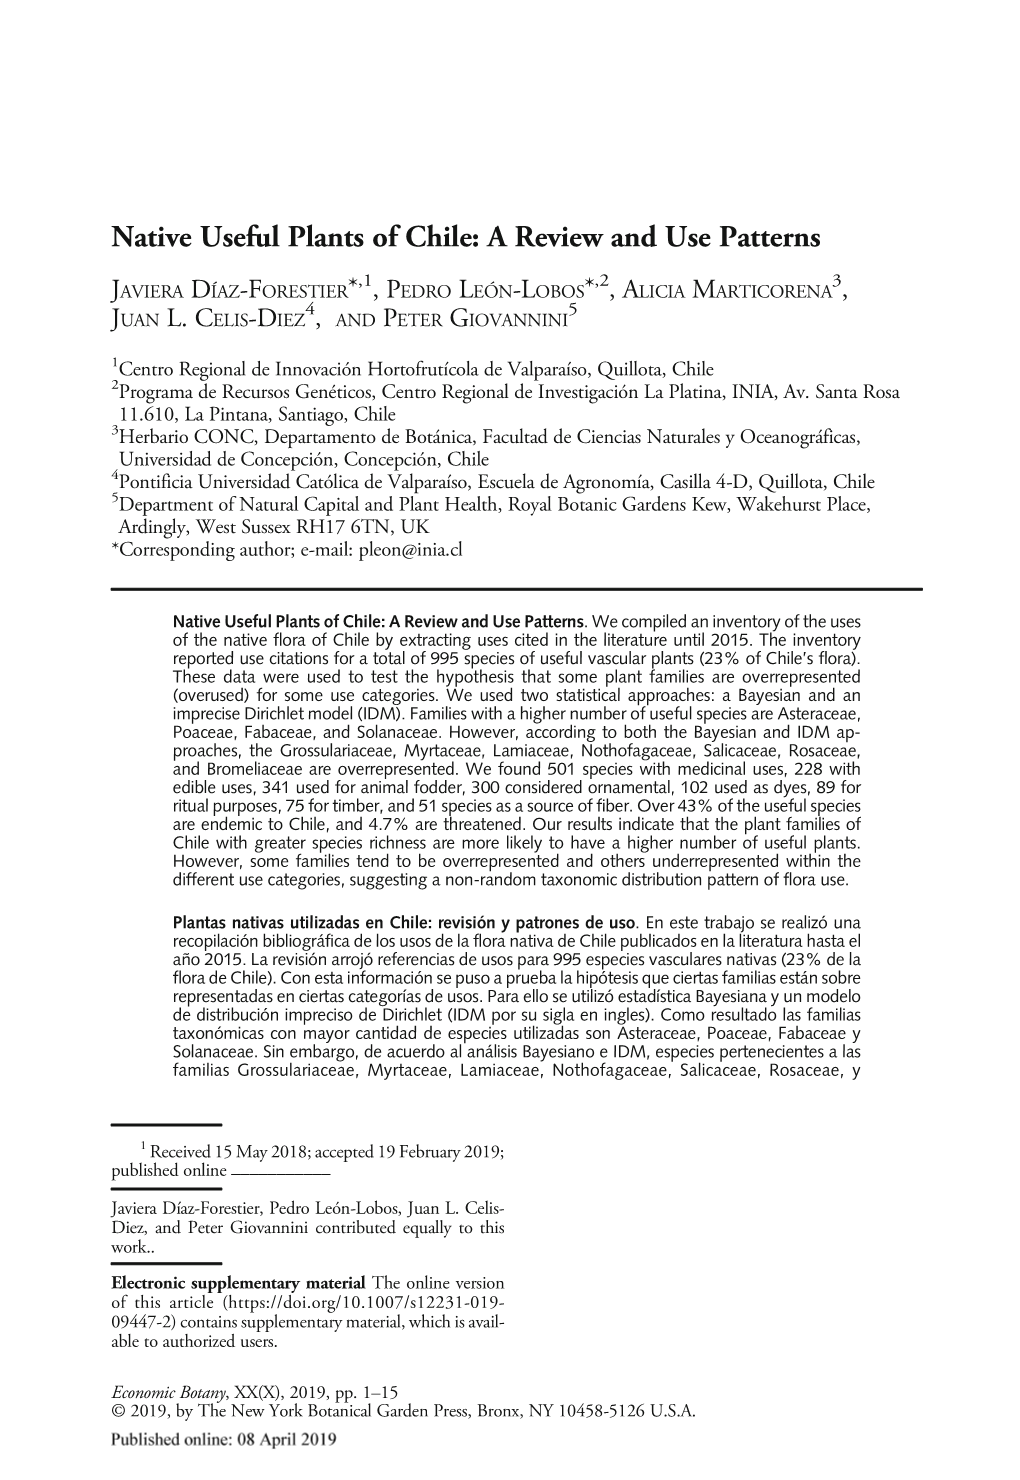 Native Useful Plants of Chile: a Review and Use Patterns